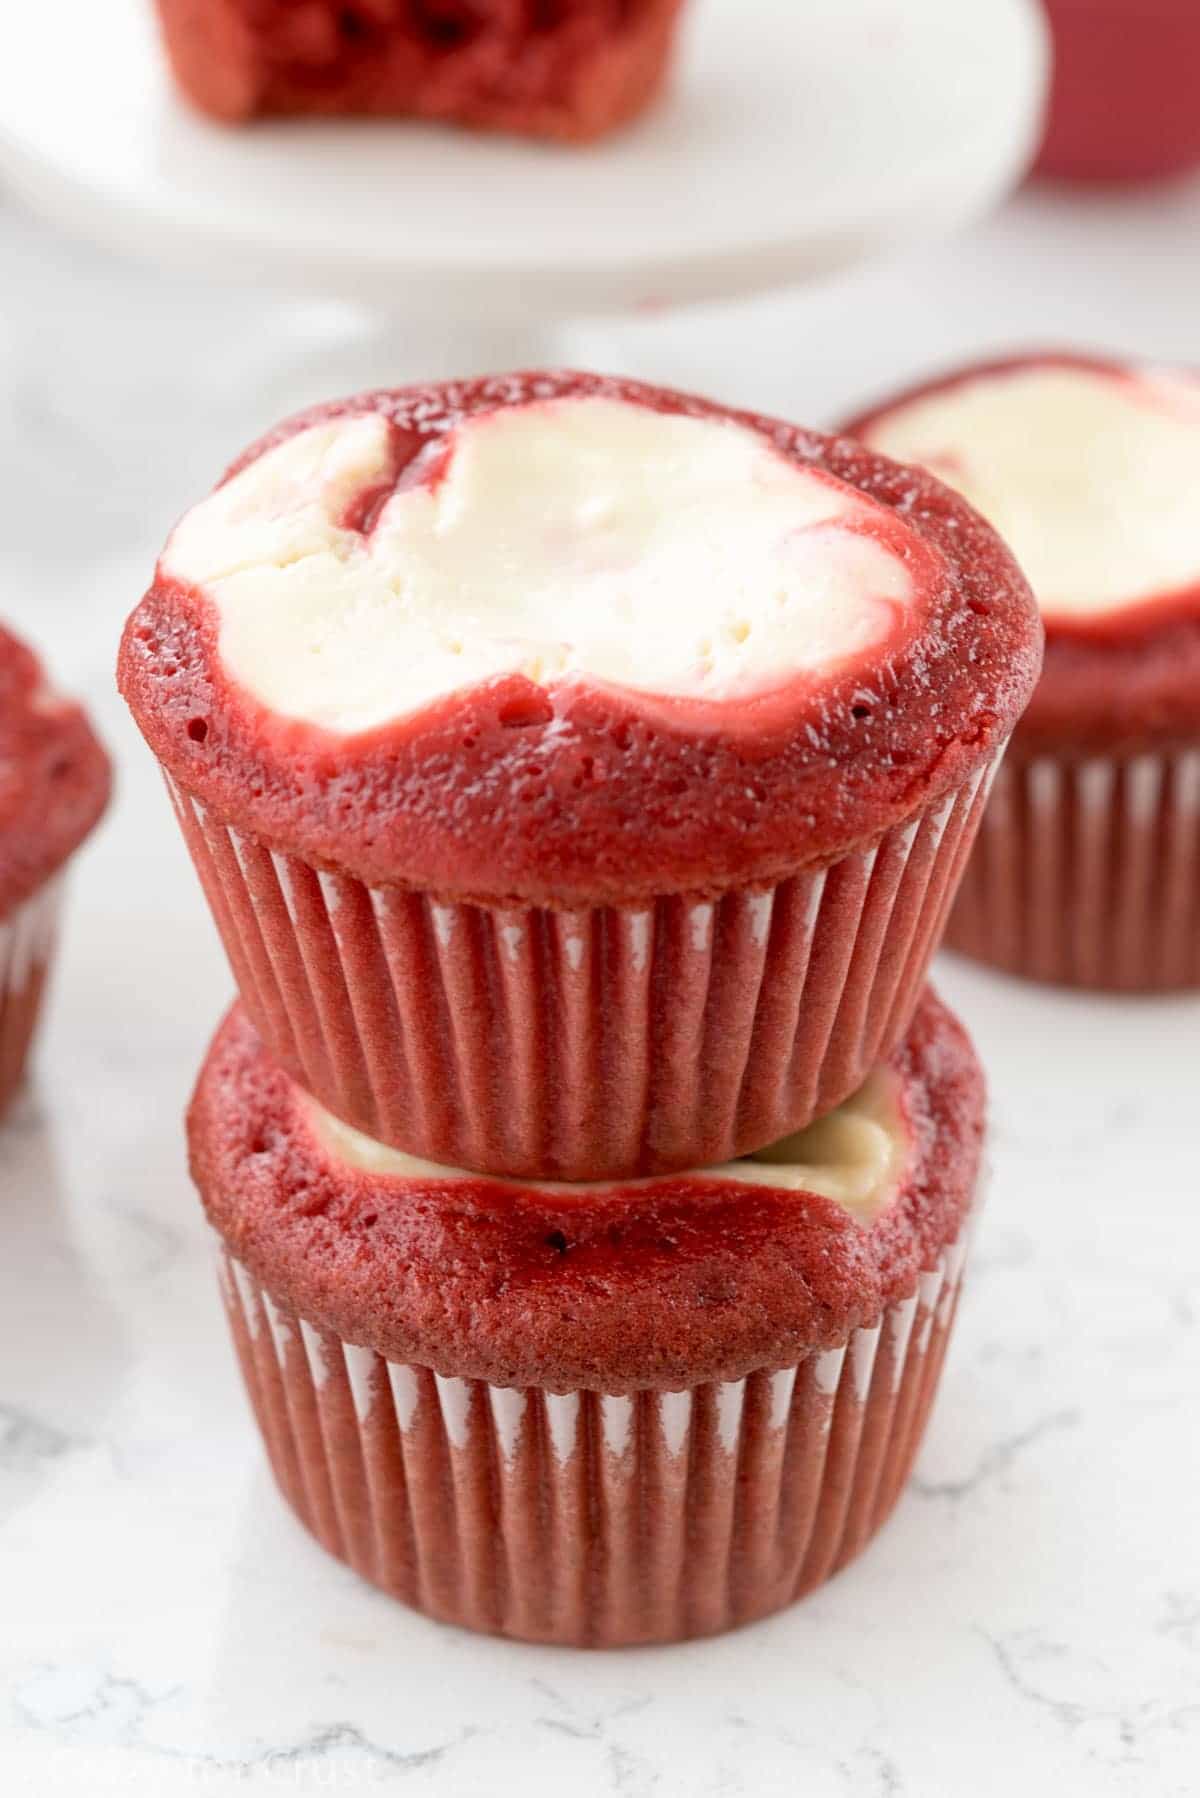 Red Velvet Cheesecake Cupcakes - an easy red velvet cupcake recipe, filled with cream cheese, and topped with cream cheese frosting!